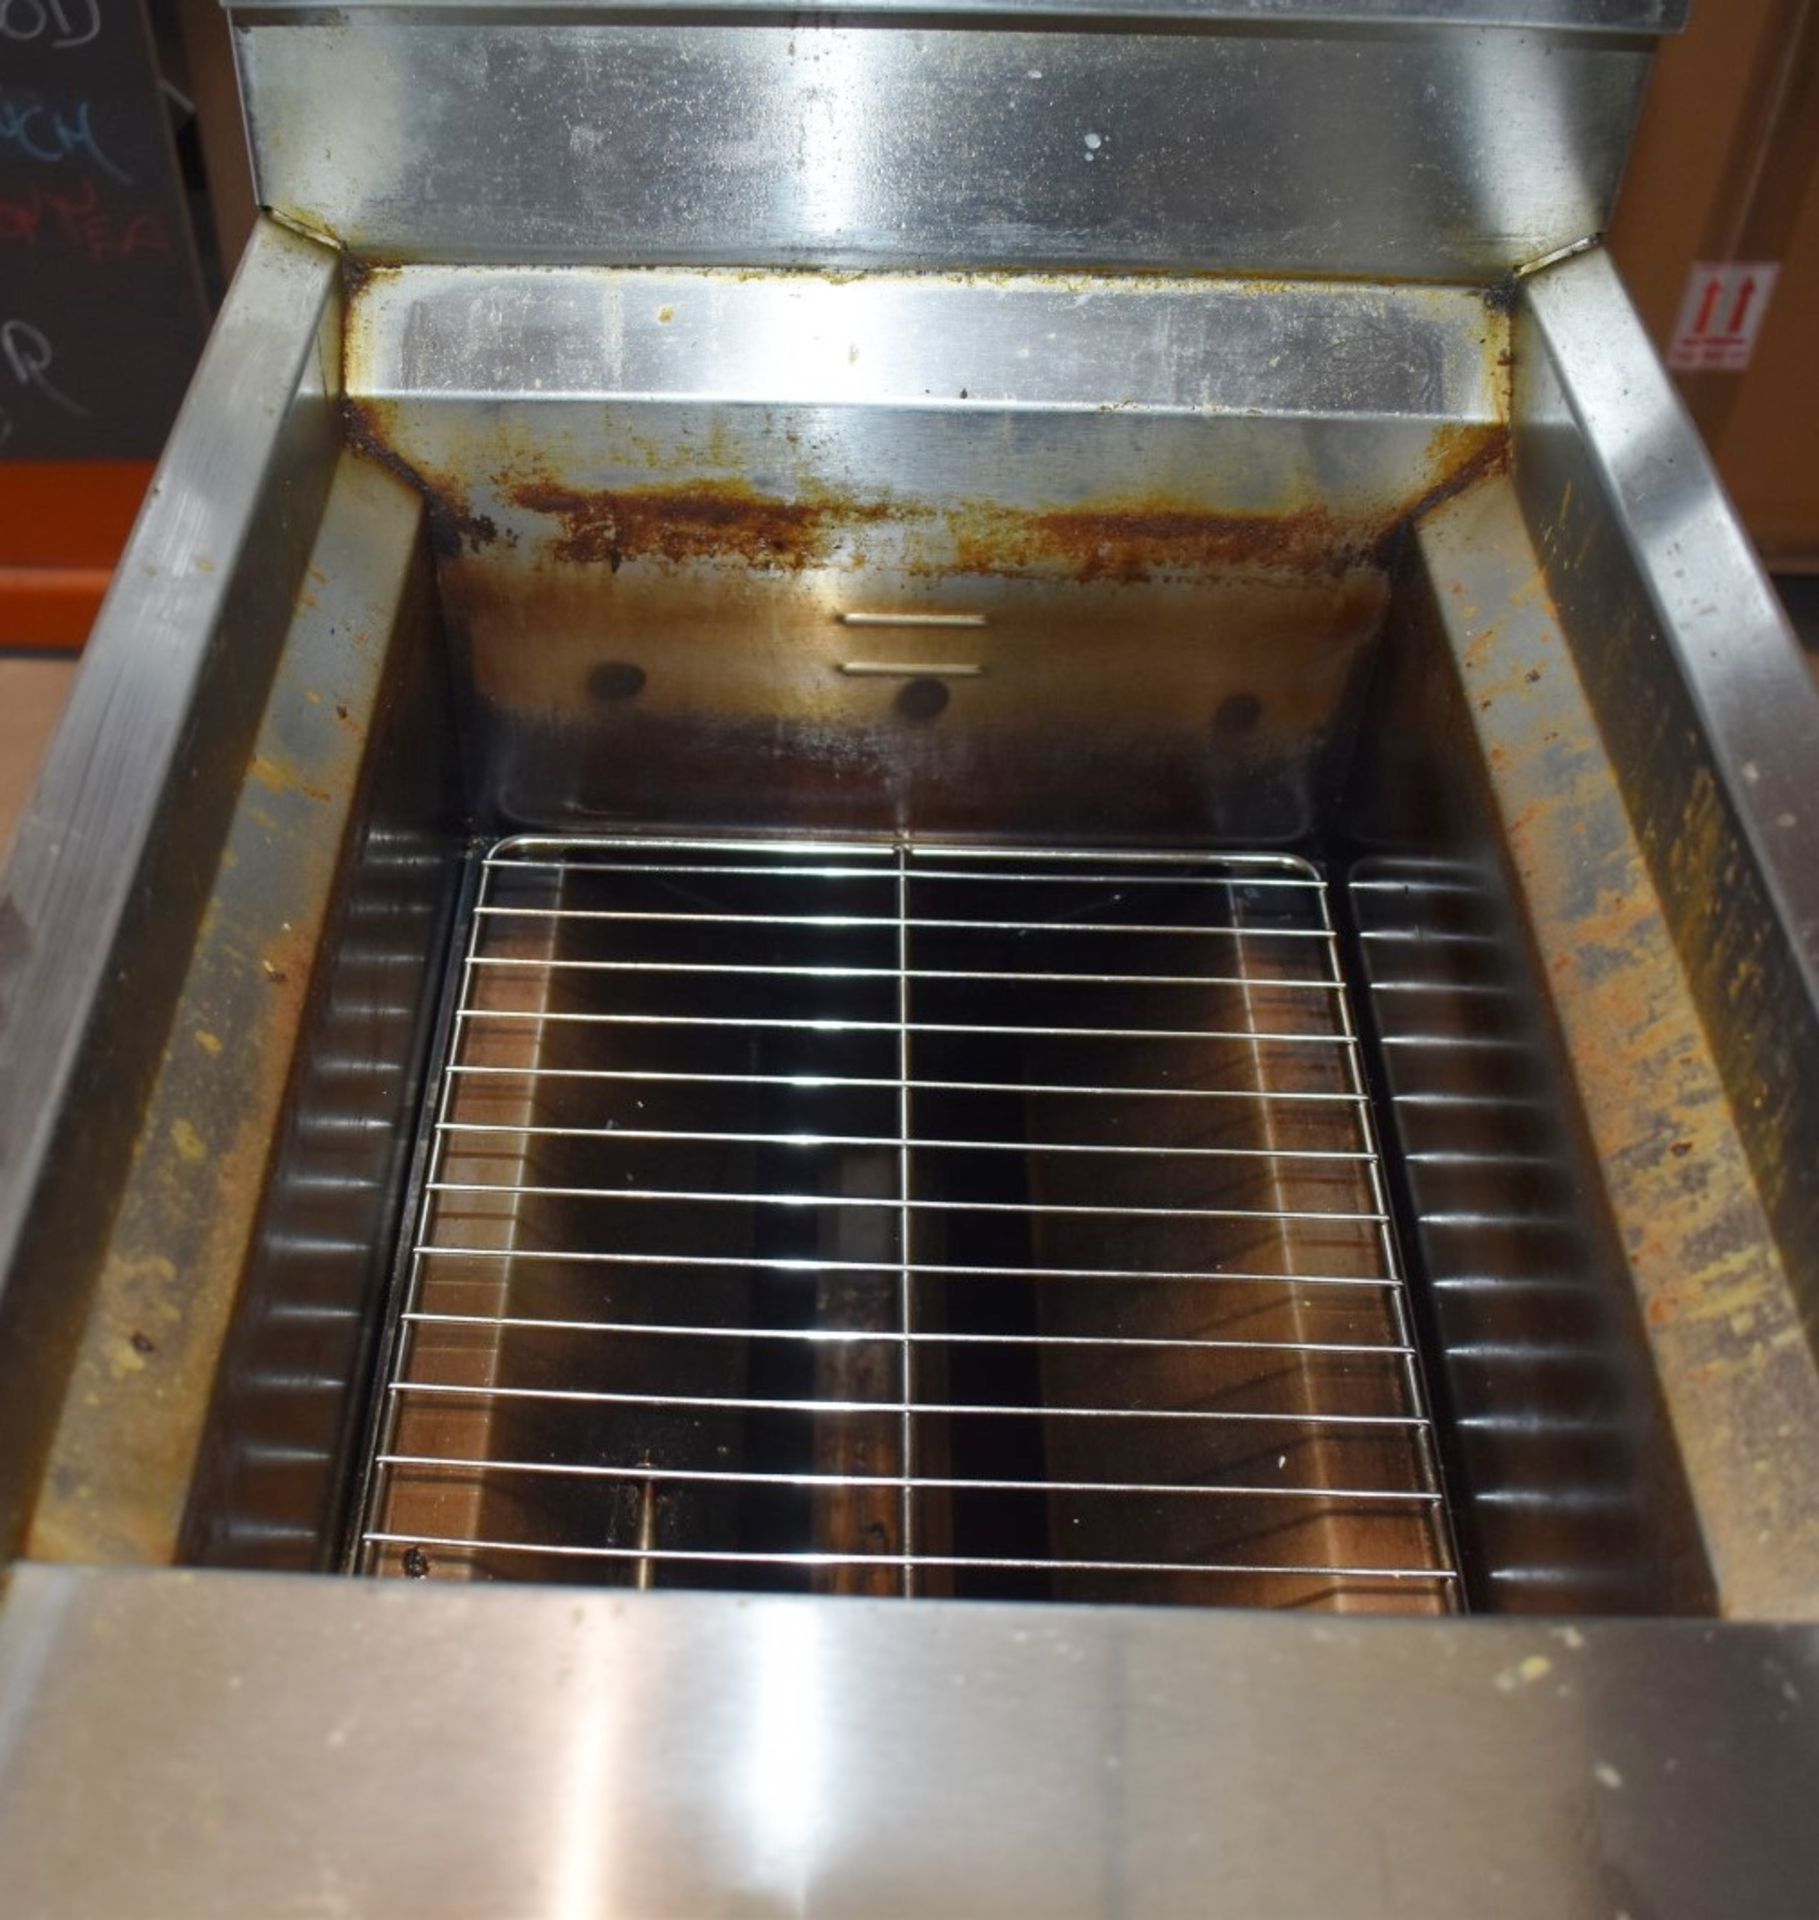 1 x Moffat Fast Fri FF18 Single Tank Commercial Gas Fryer With Stainless Steel Exterior - Image 3 of 13